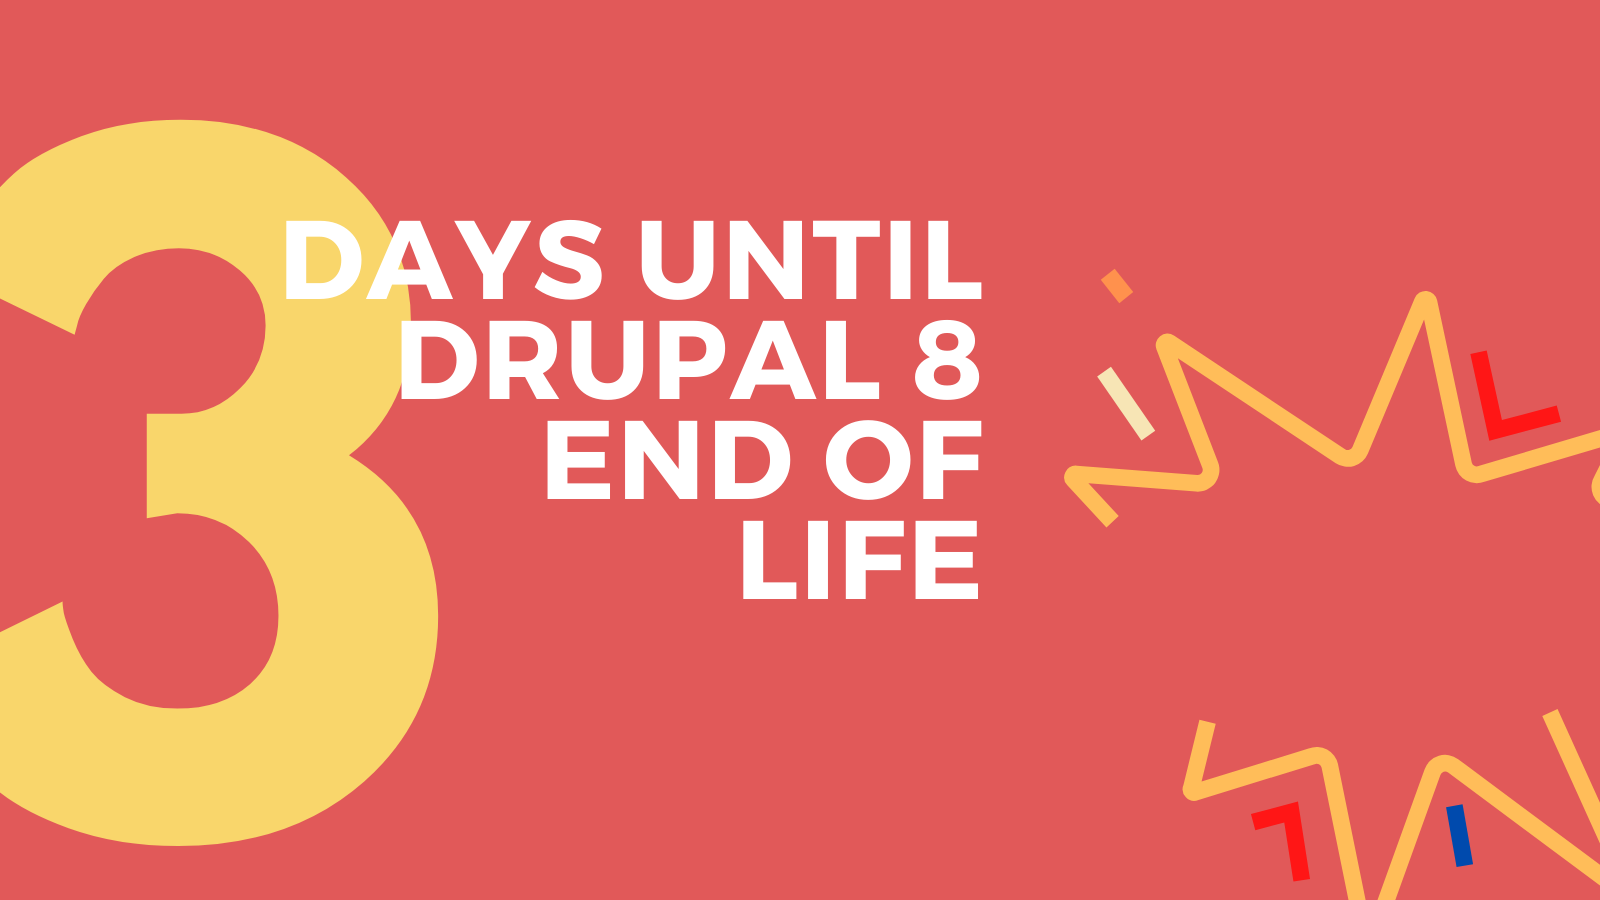 Three days to go until Drupal 8 End of Life